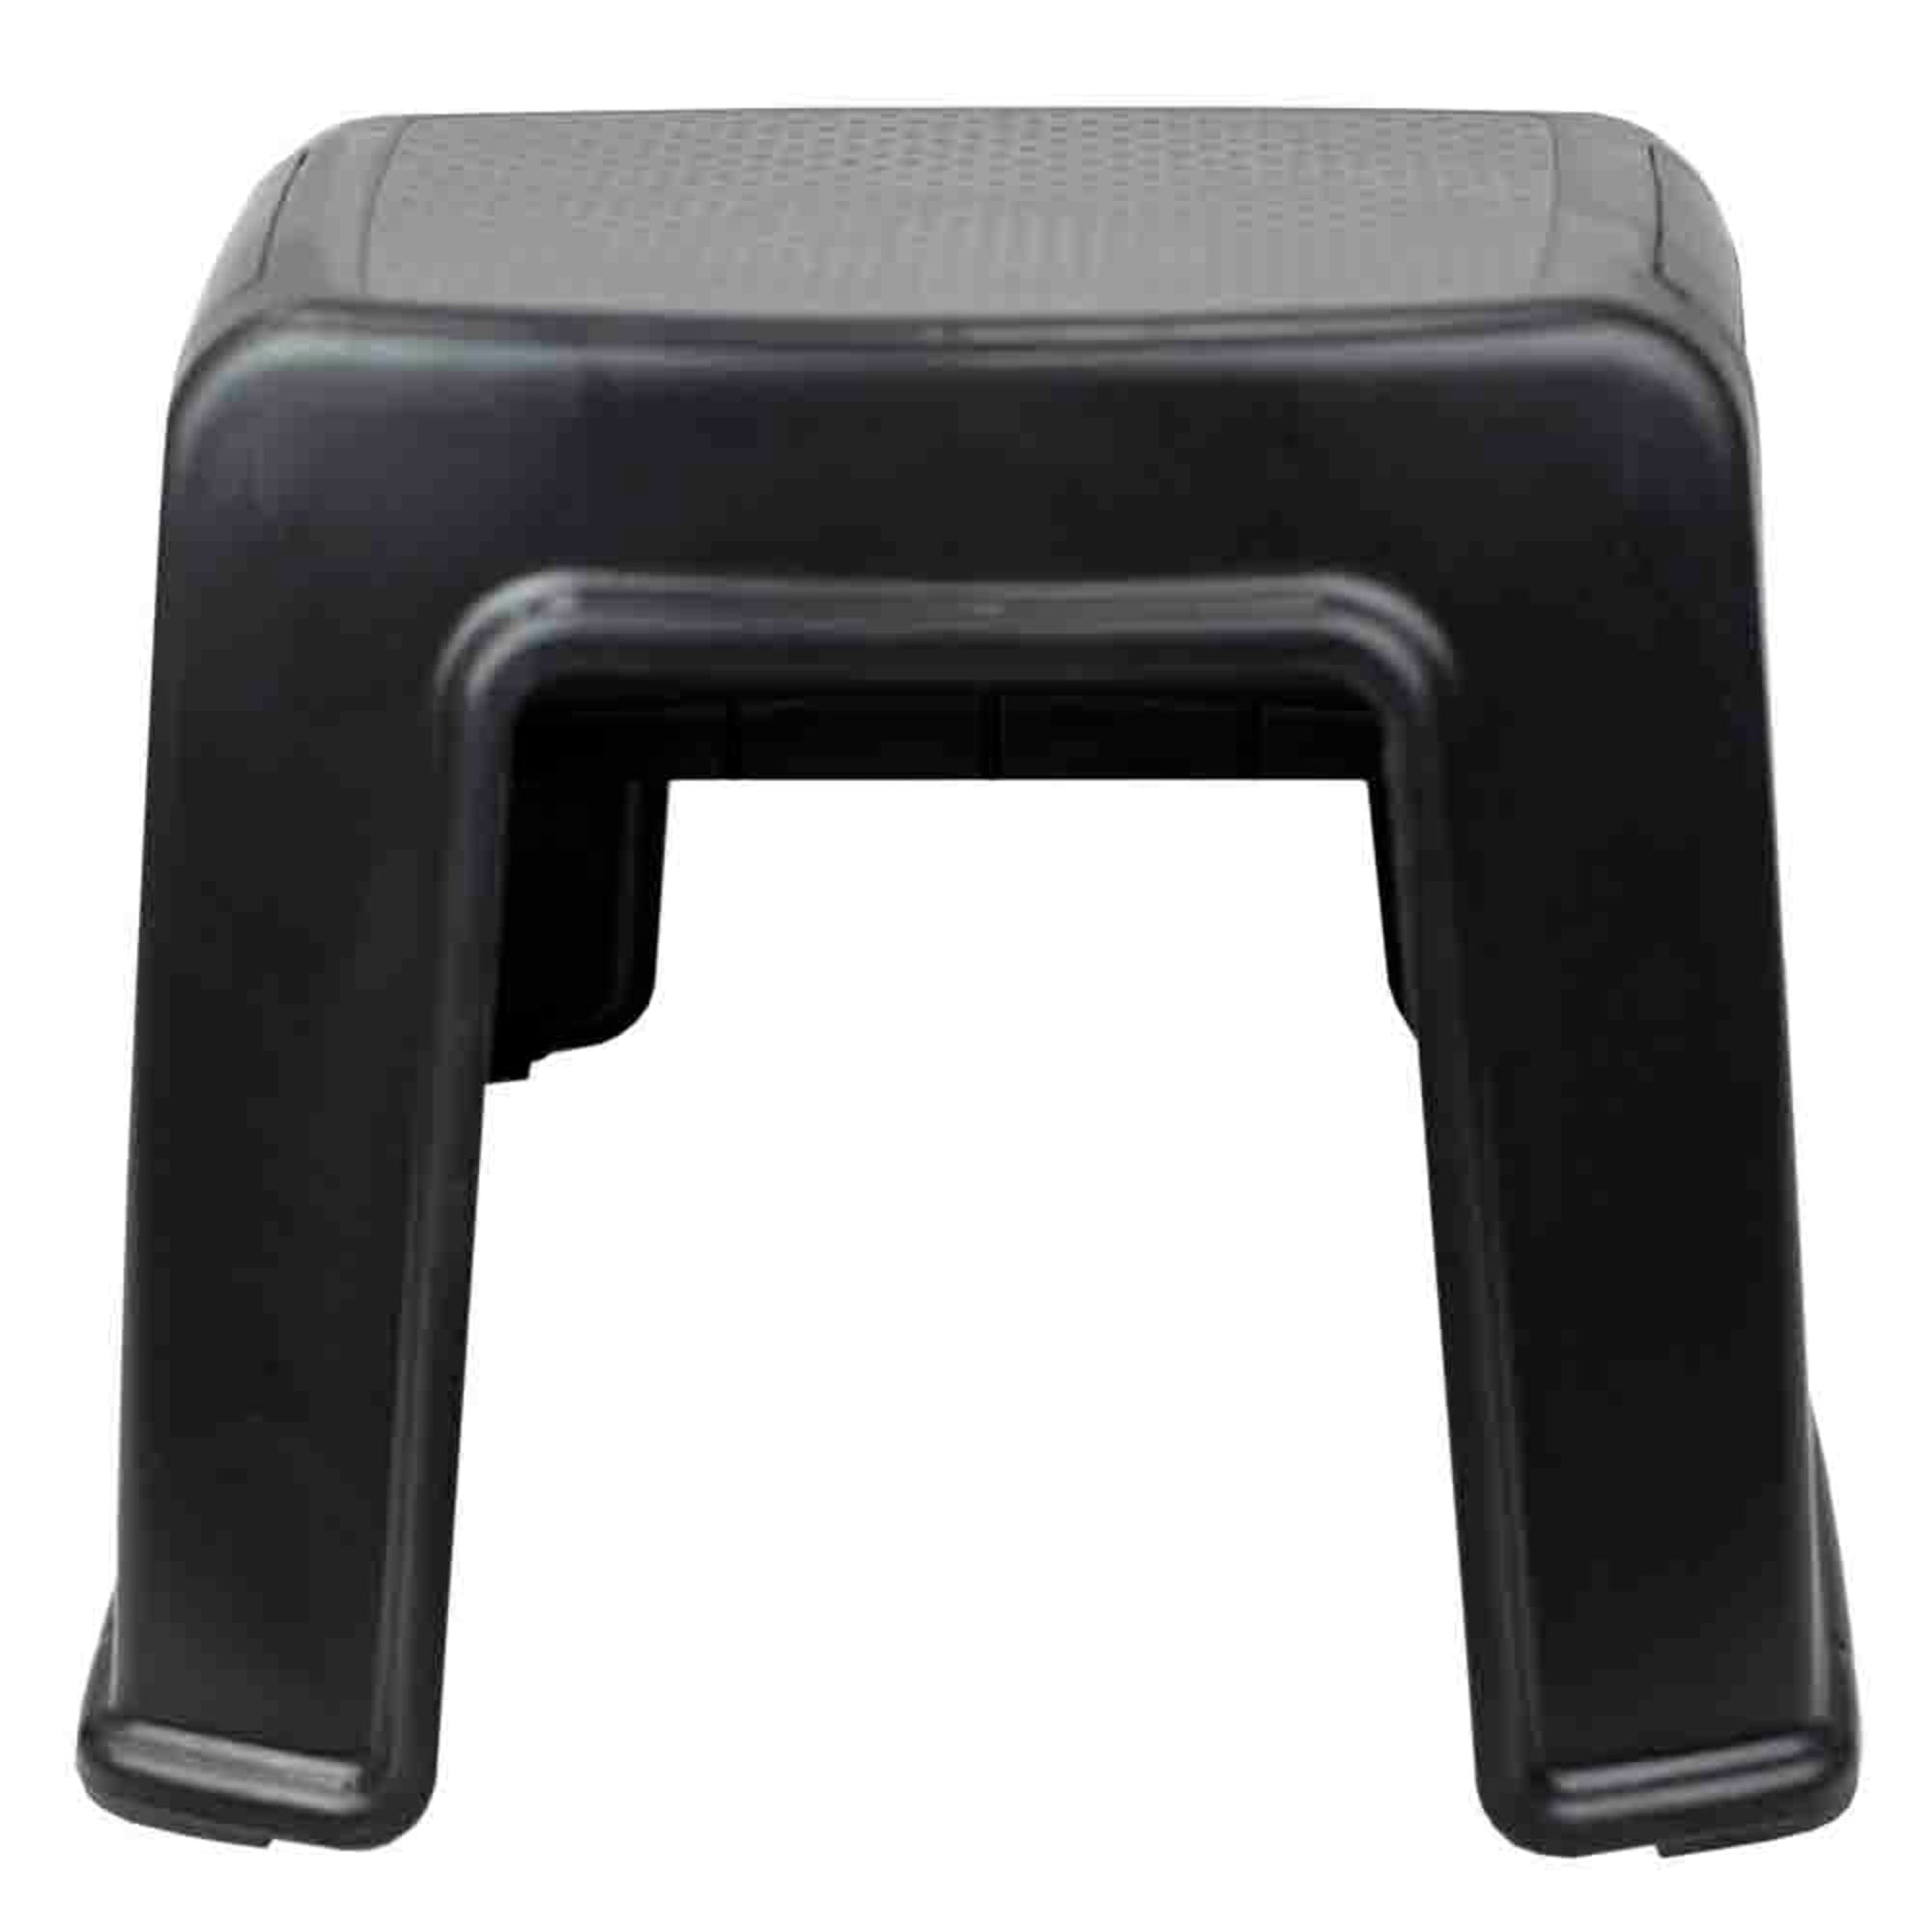 Home Basics 2 Step Plastic Stool with Slip-Resistant Rubber Top and Easy Grip Handles $10.00 EACH, CASE PACK OF 12